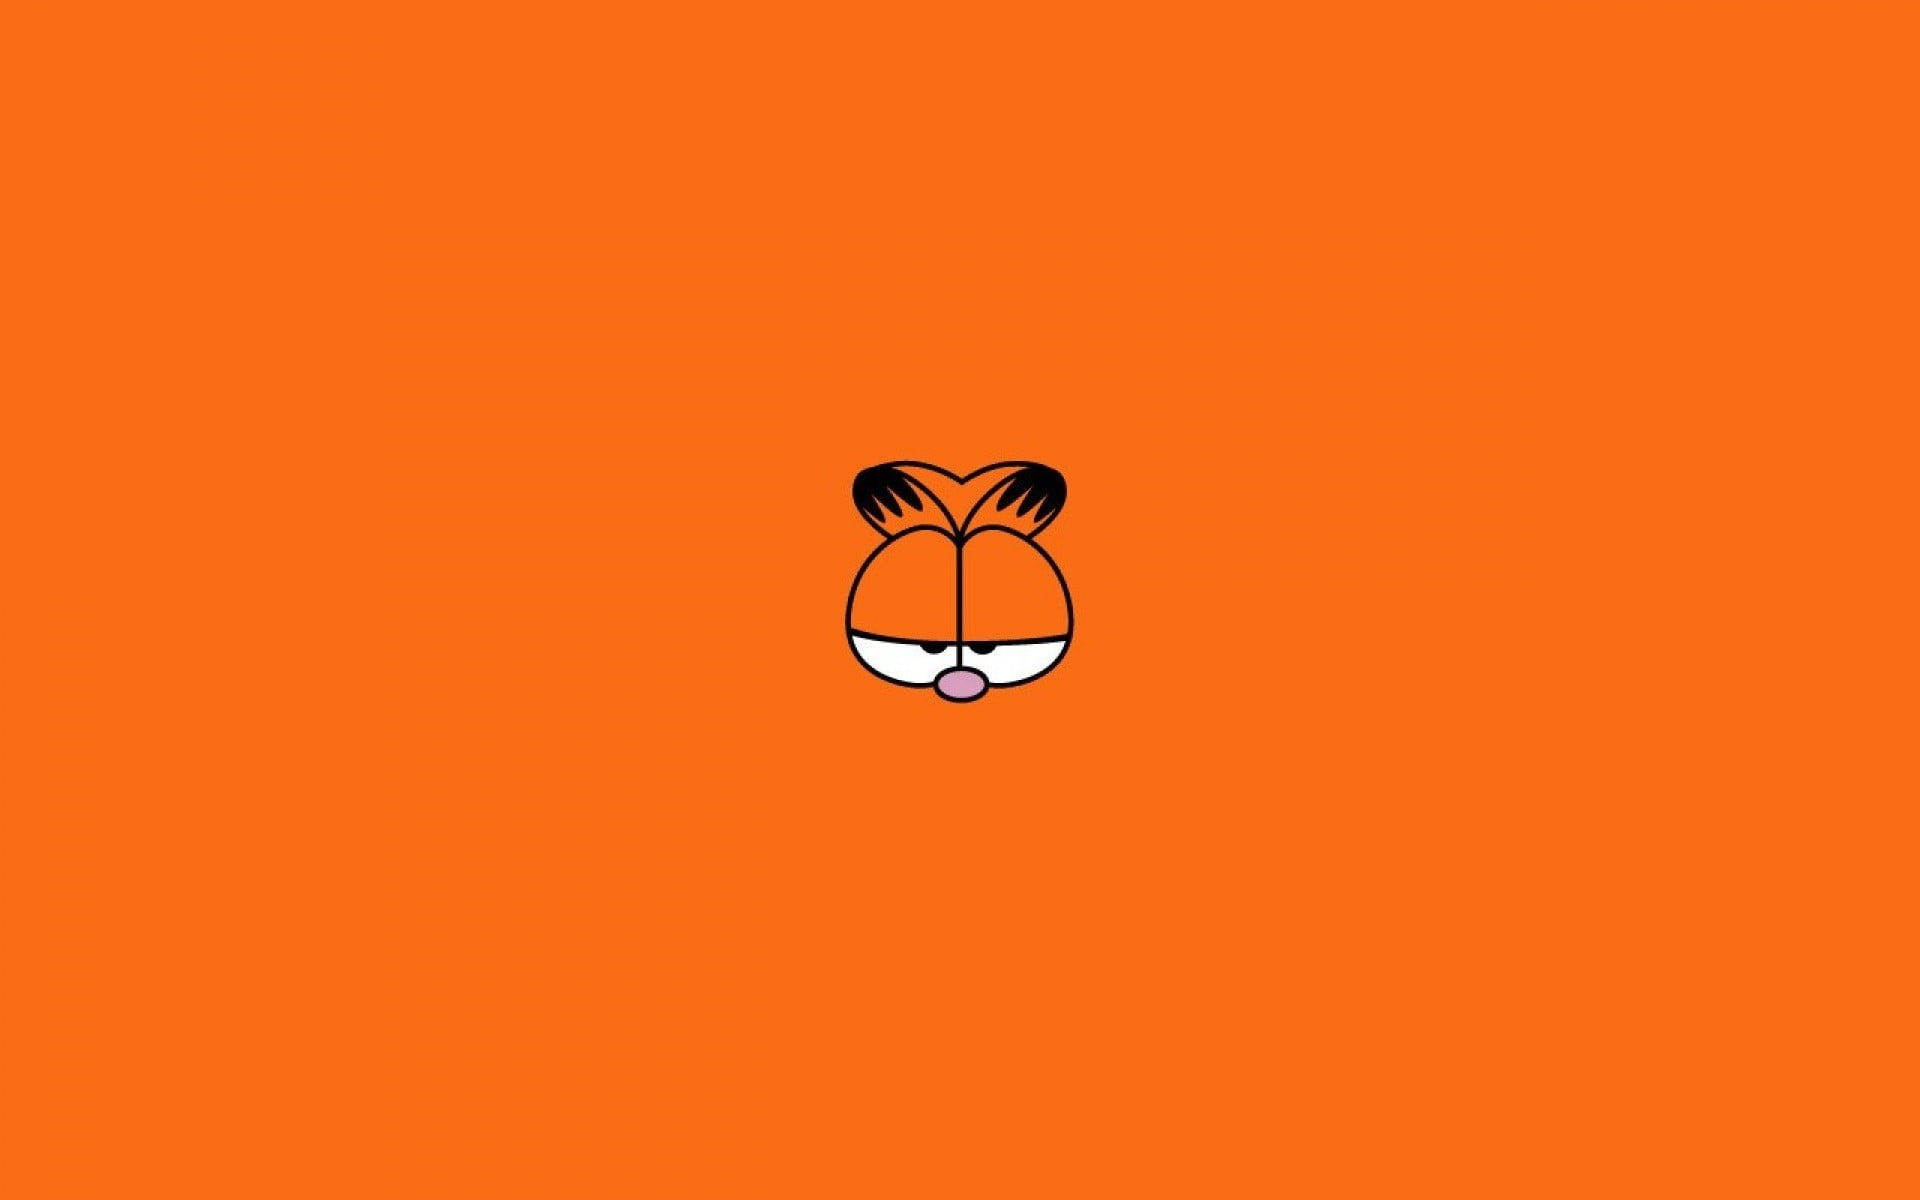 HD wallpaper: Garfield and Friends, animation, comedy, funny, cat, orange |  Wallpaper Flare